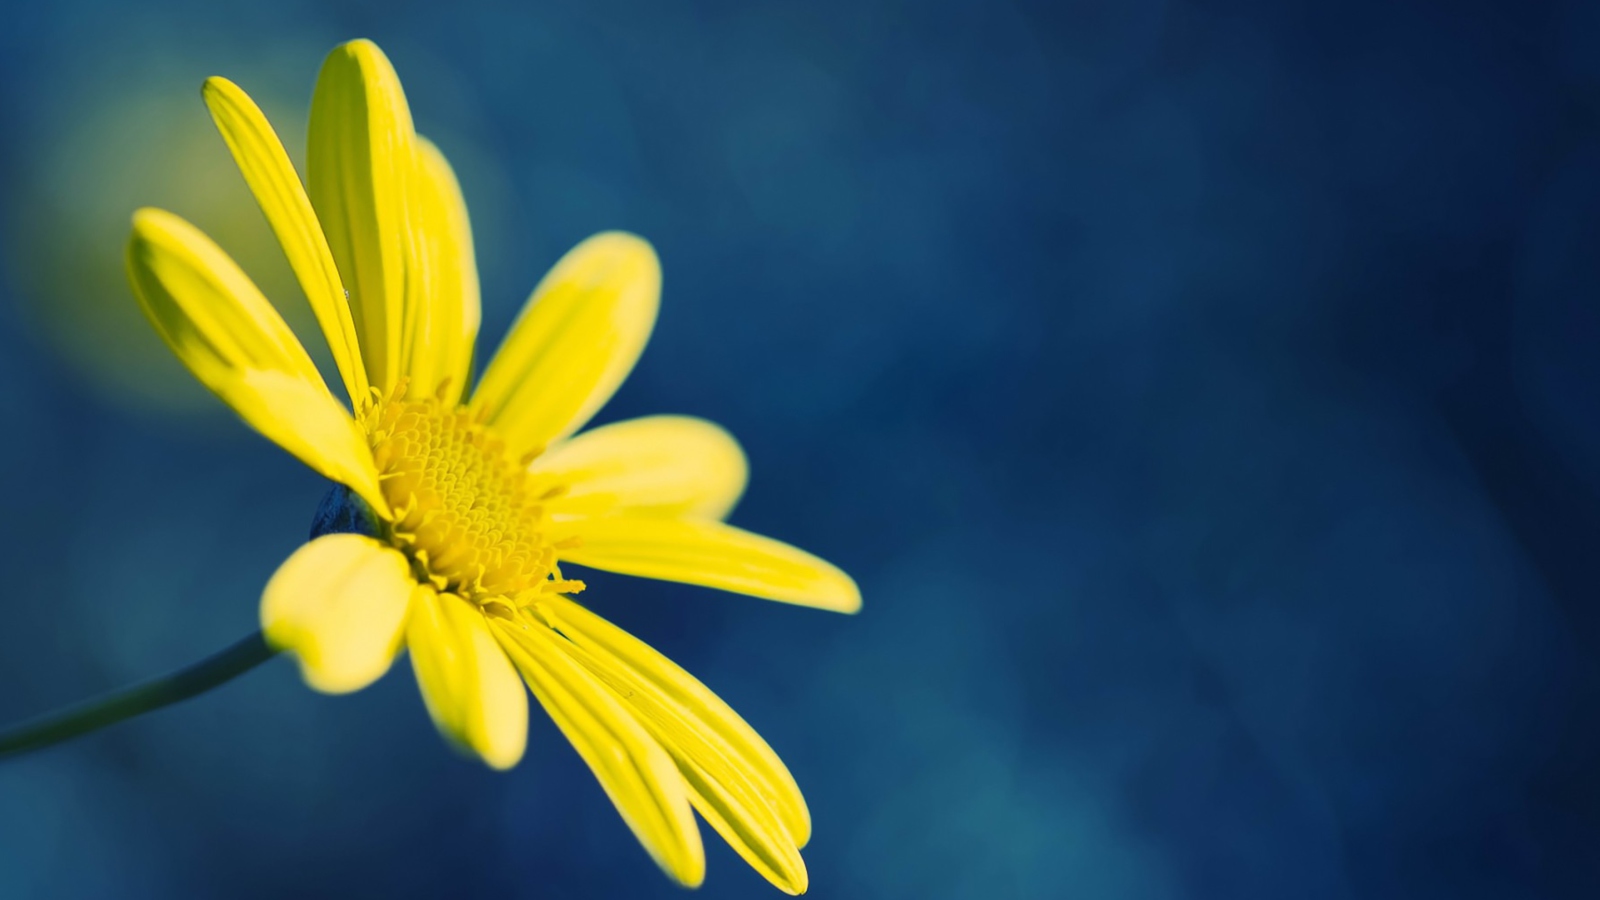 Yellow Flower On Blue Background wallpaper 1600x900